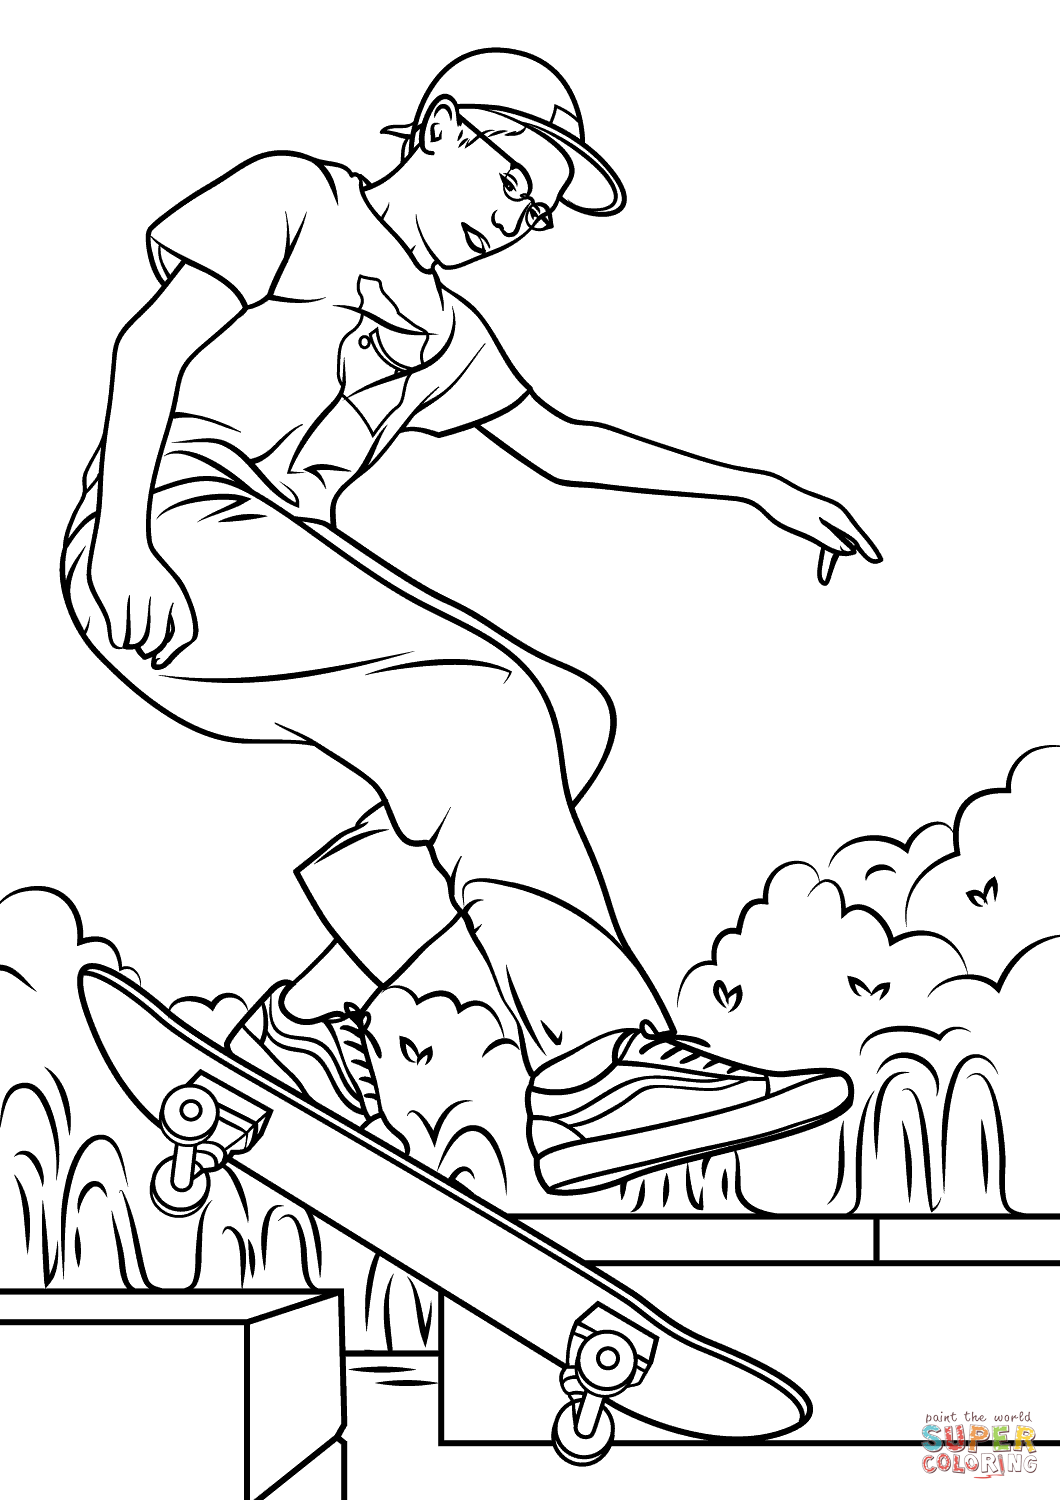 Boy skateboarding coloring page free printable coloring pages